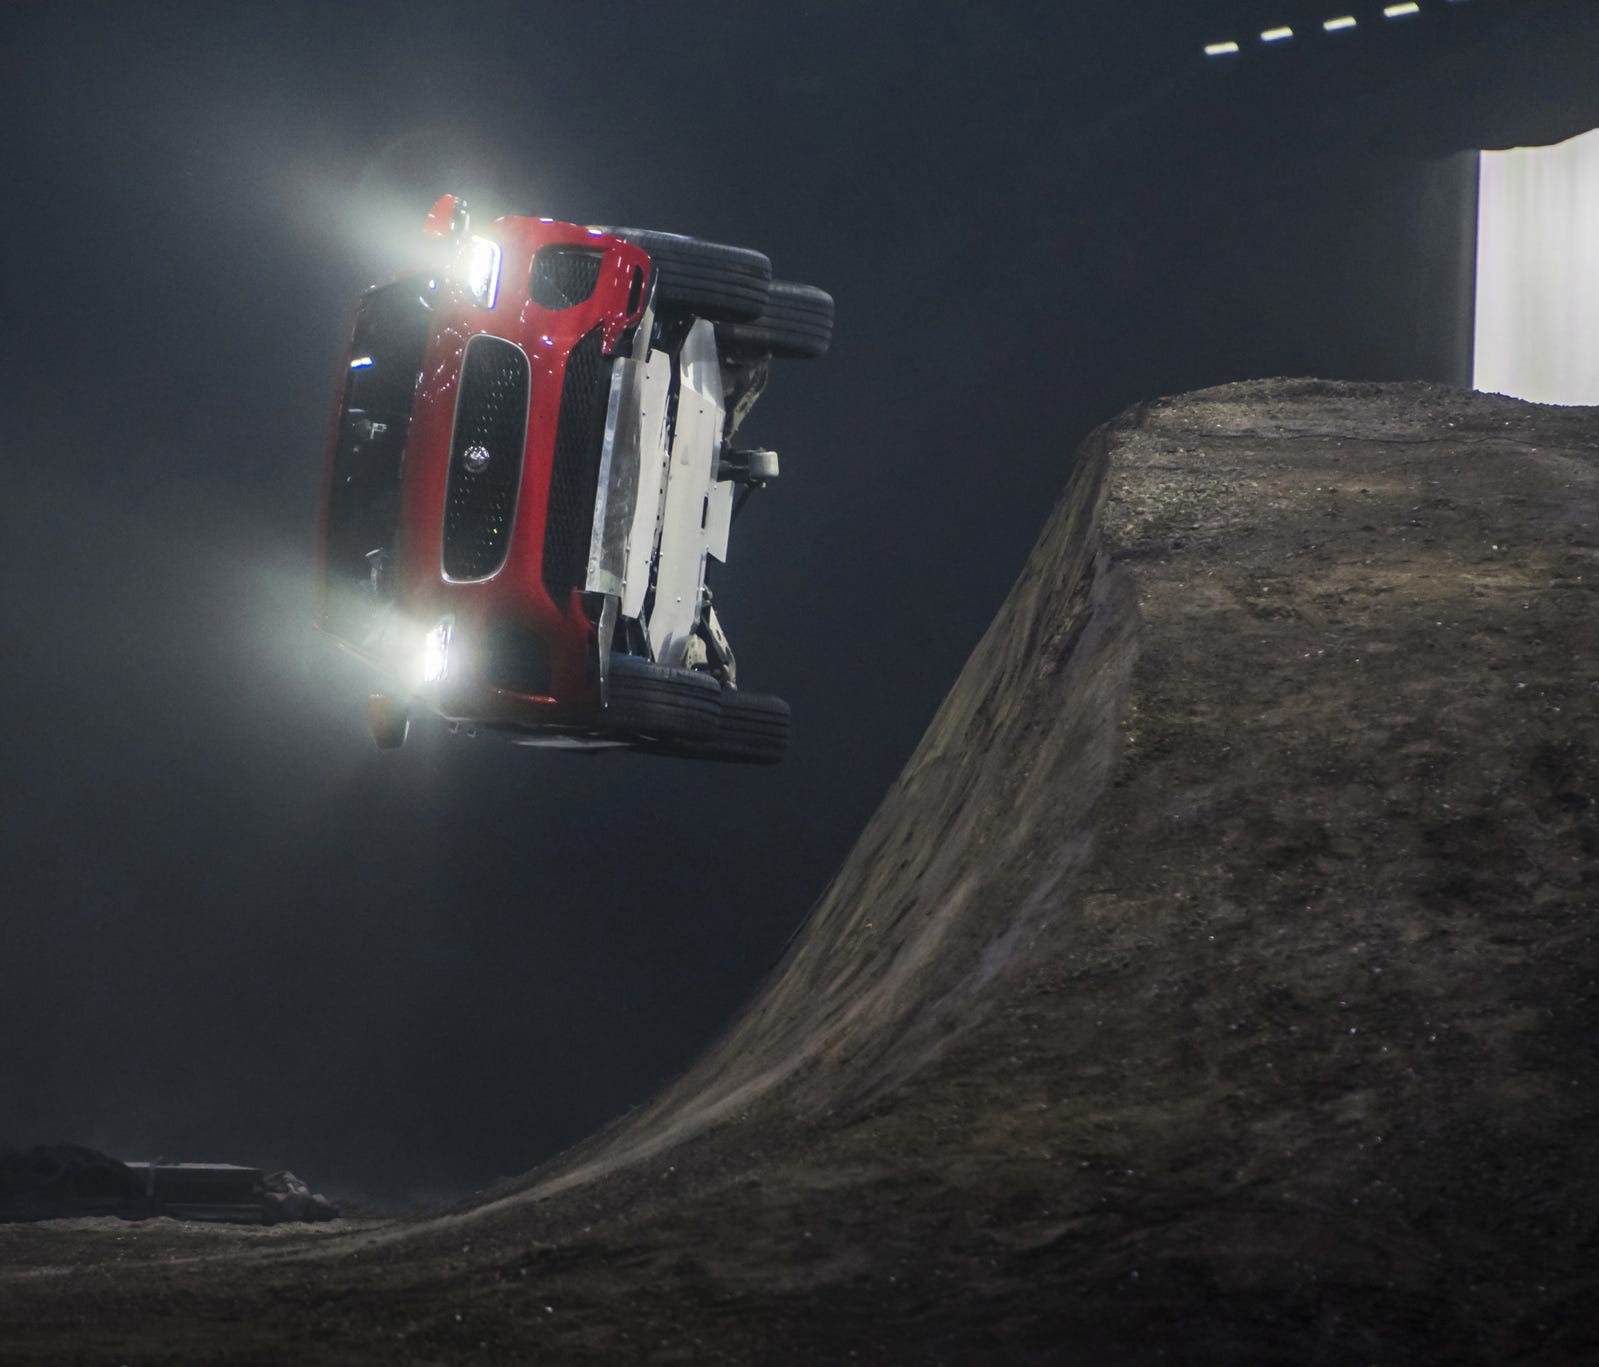 The 2018 Jaguar E-PACE compact crossover completes a 50-foot barrel roll at London's ExCeL venue, with stunt driver Terry Grant behind the wheel.